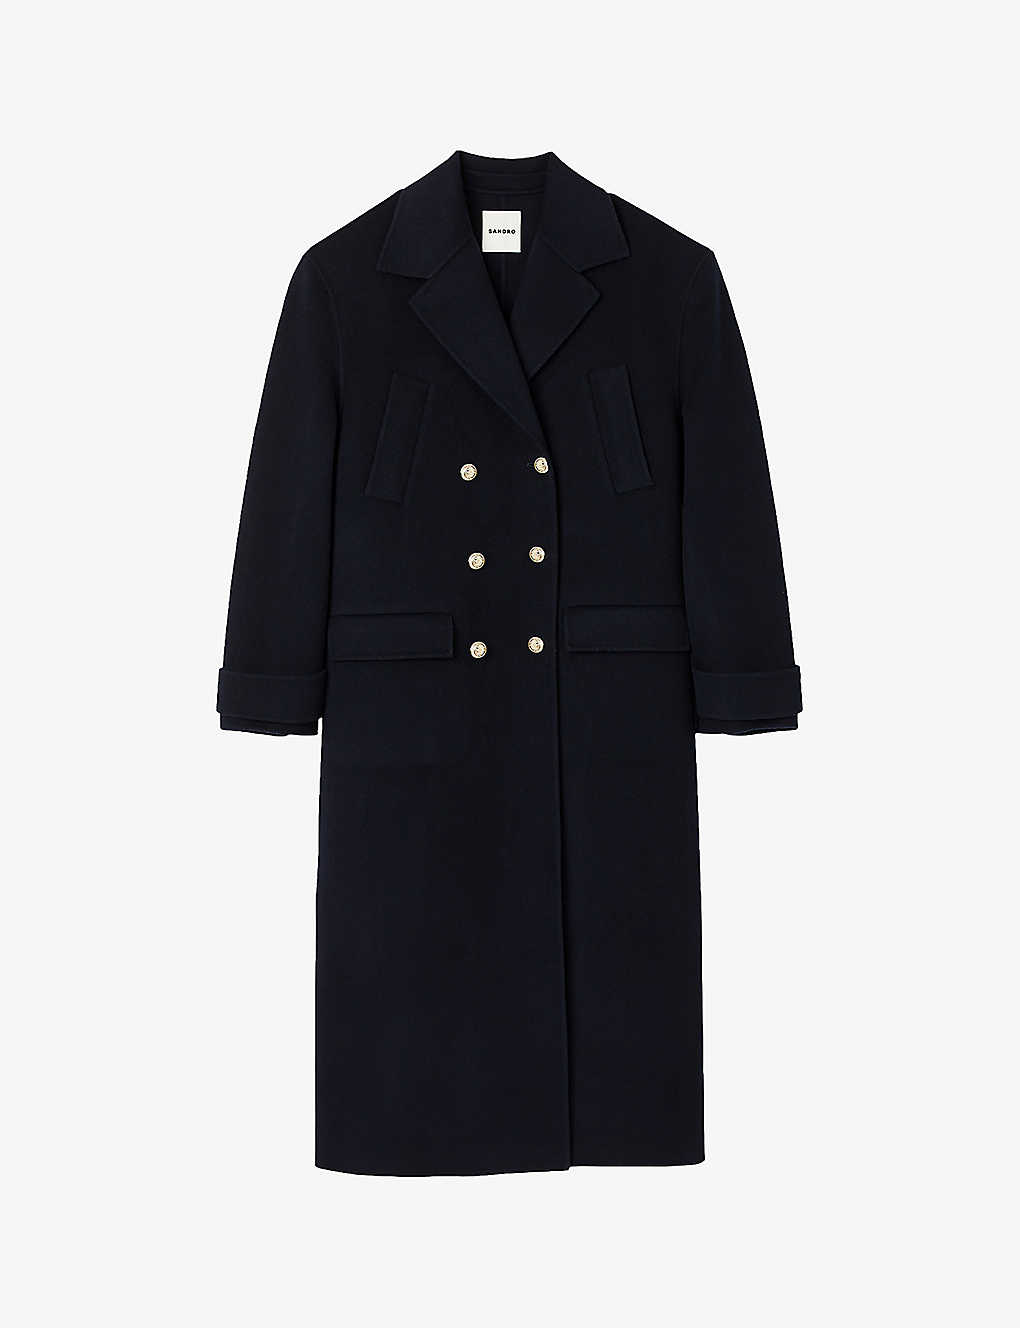 Sandro Womens Bleus Bettina Button-up Double-breasted Wool Coat